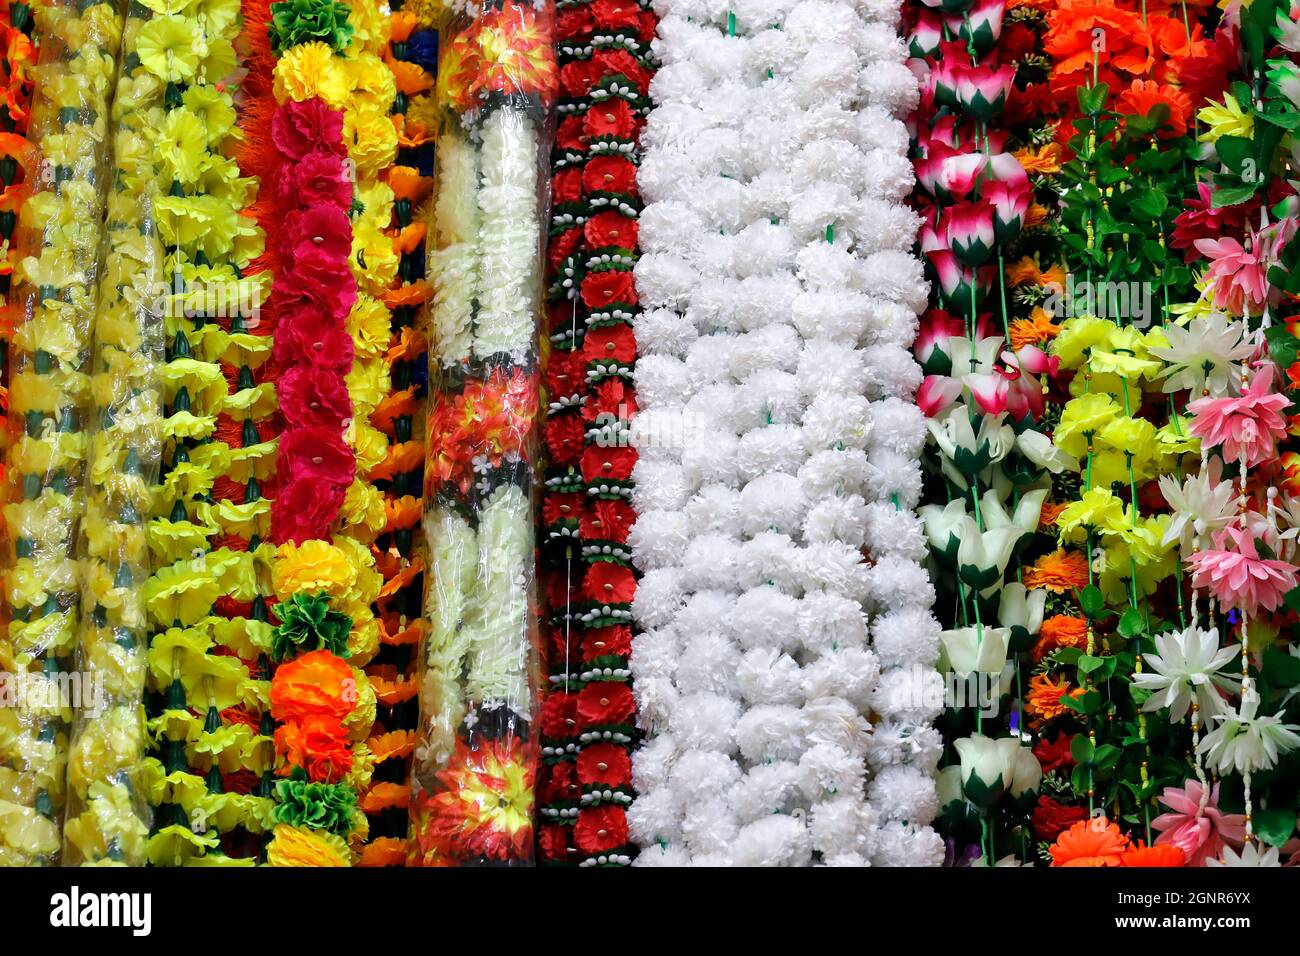 Indian flower decoration made of plastic flowers and in all kind of ...